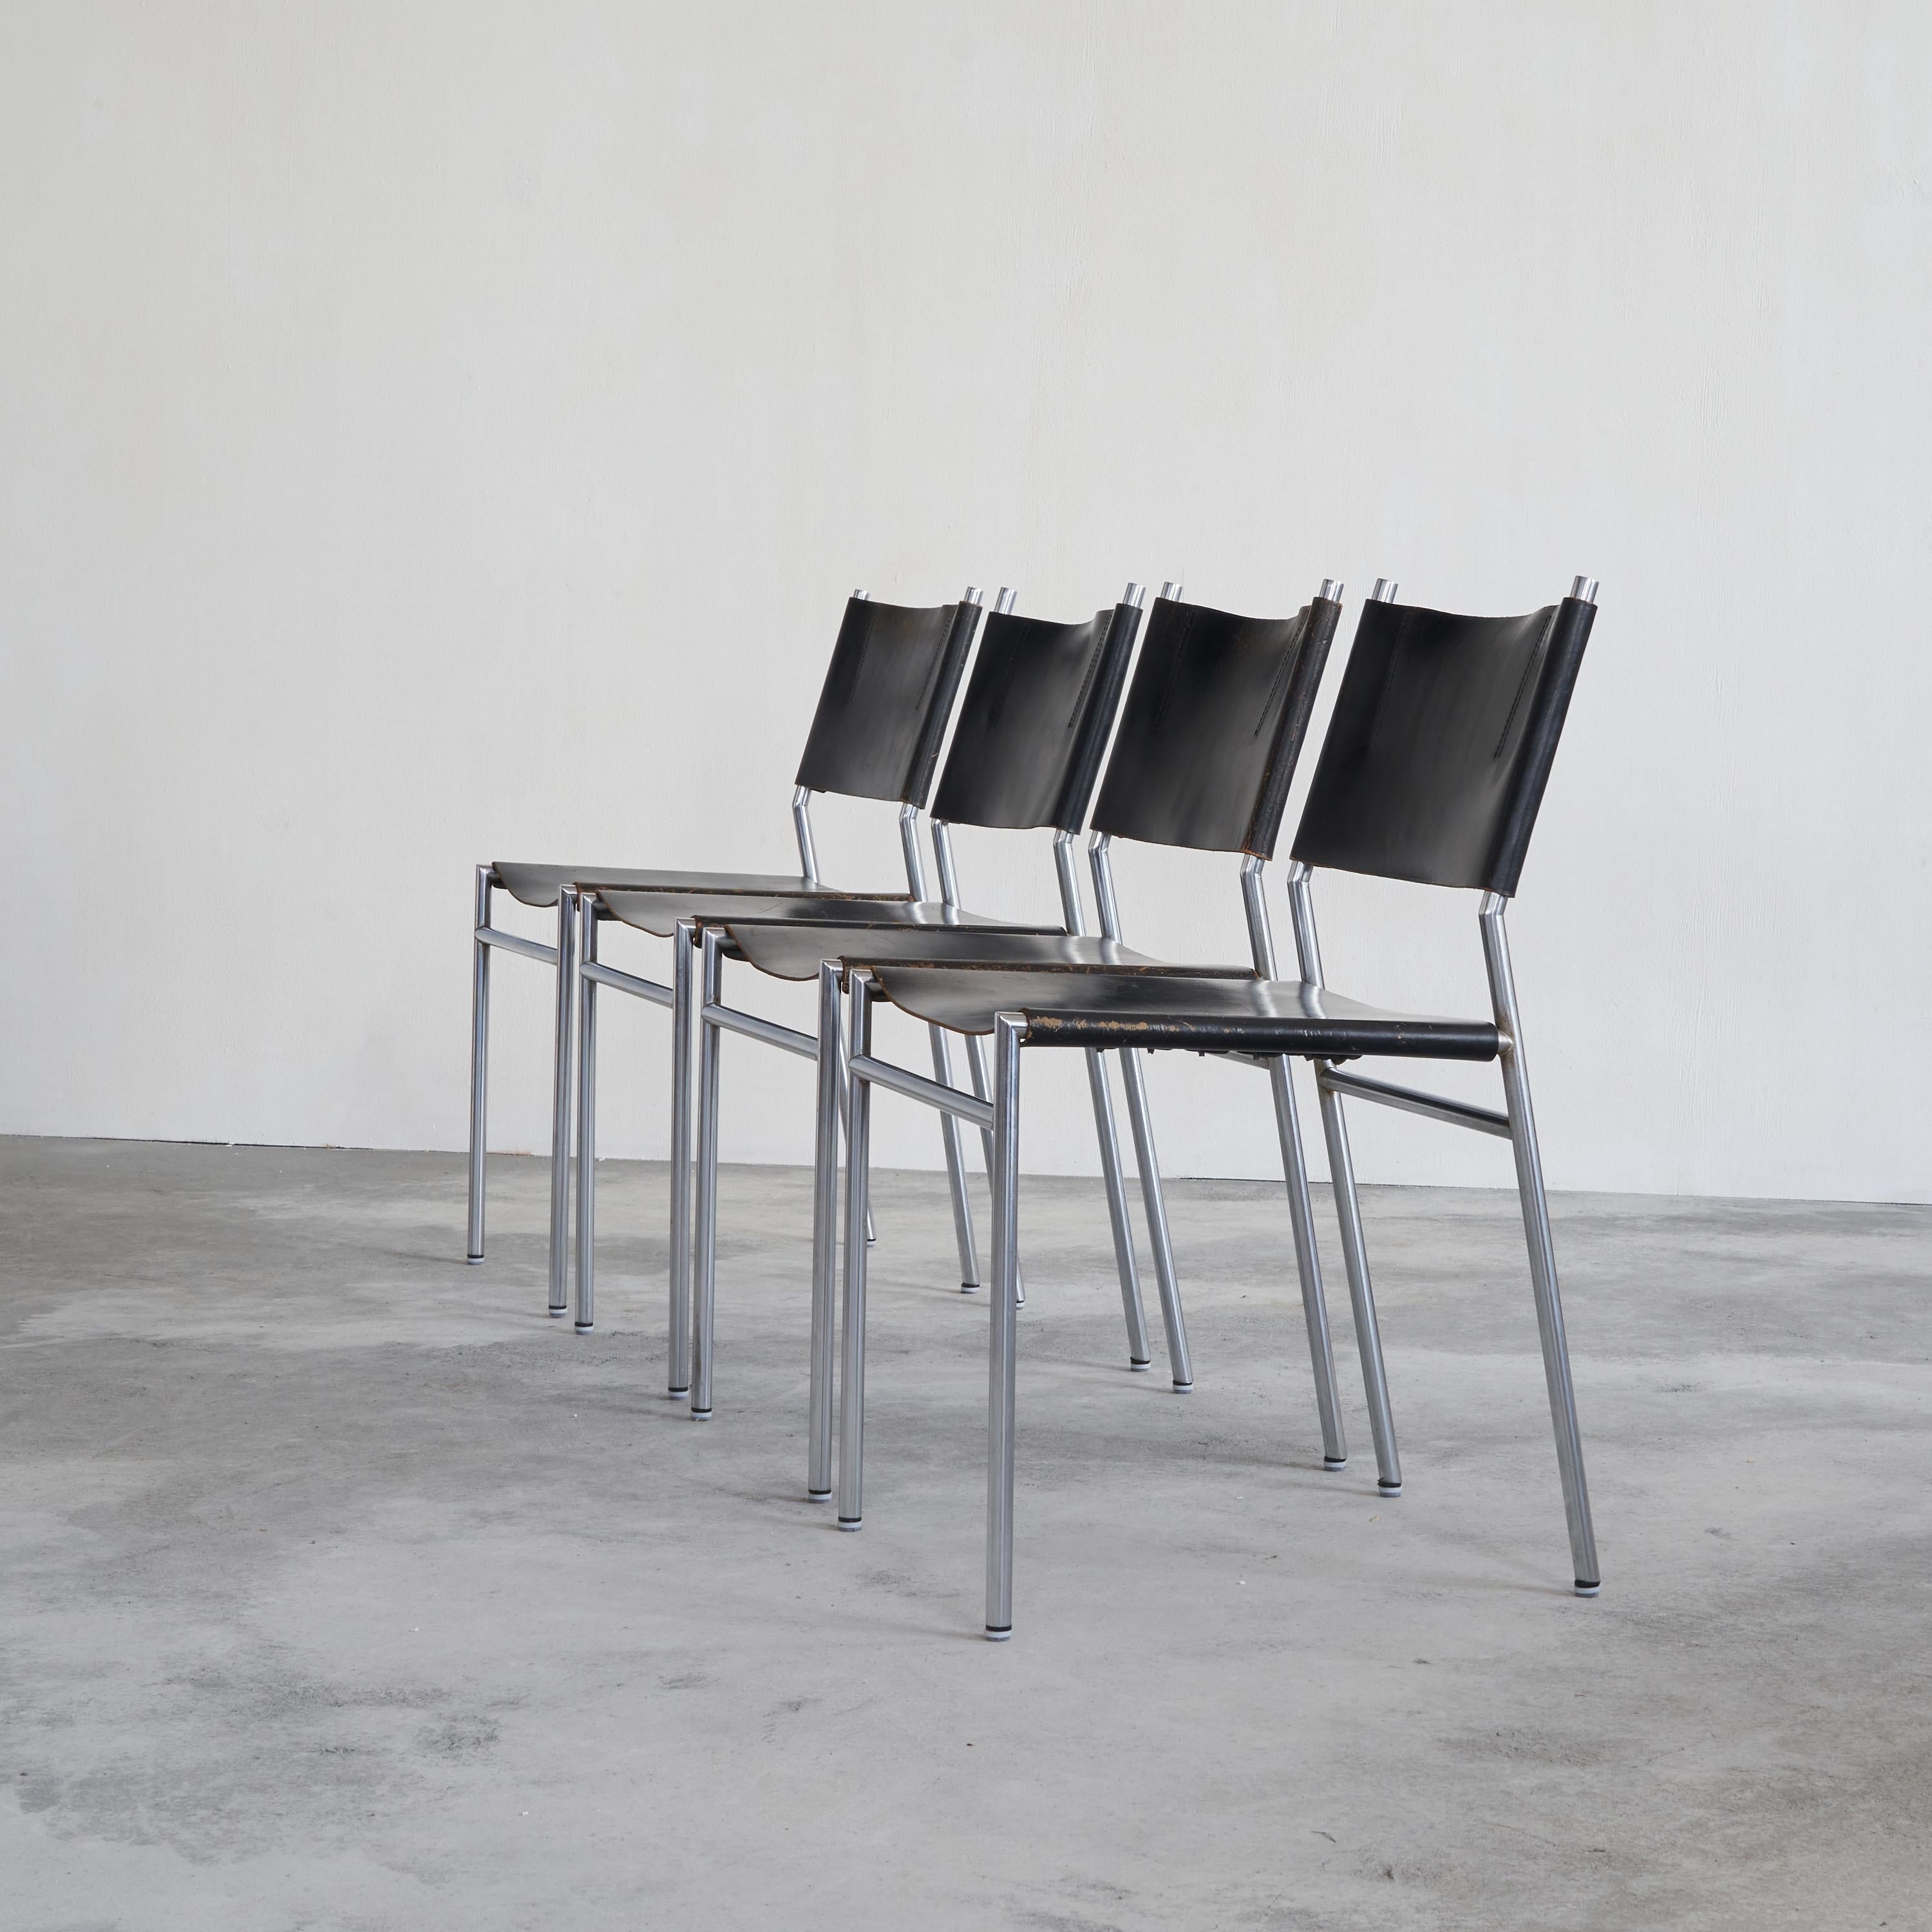 Martin Visser Set of 4 'SE06' Chairs in Patinated Black Leather. The Netherlands, 1970s.

Clean lines and a distinct use of leather and metal. The SE06, designed in 1960, is one of the best designs by Dutch designer Martin Visser. SE stands for